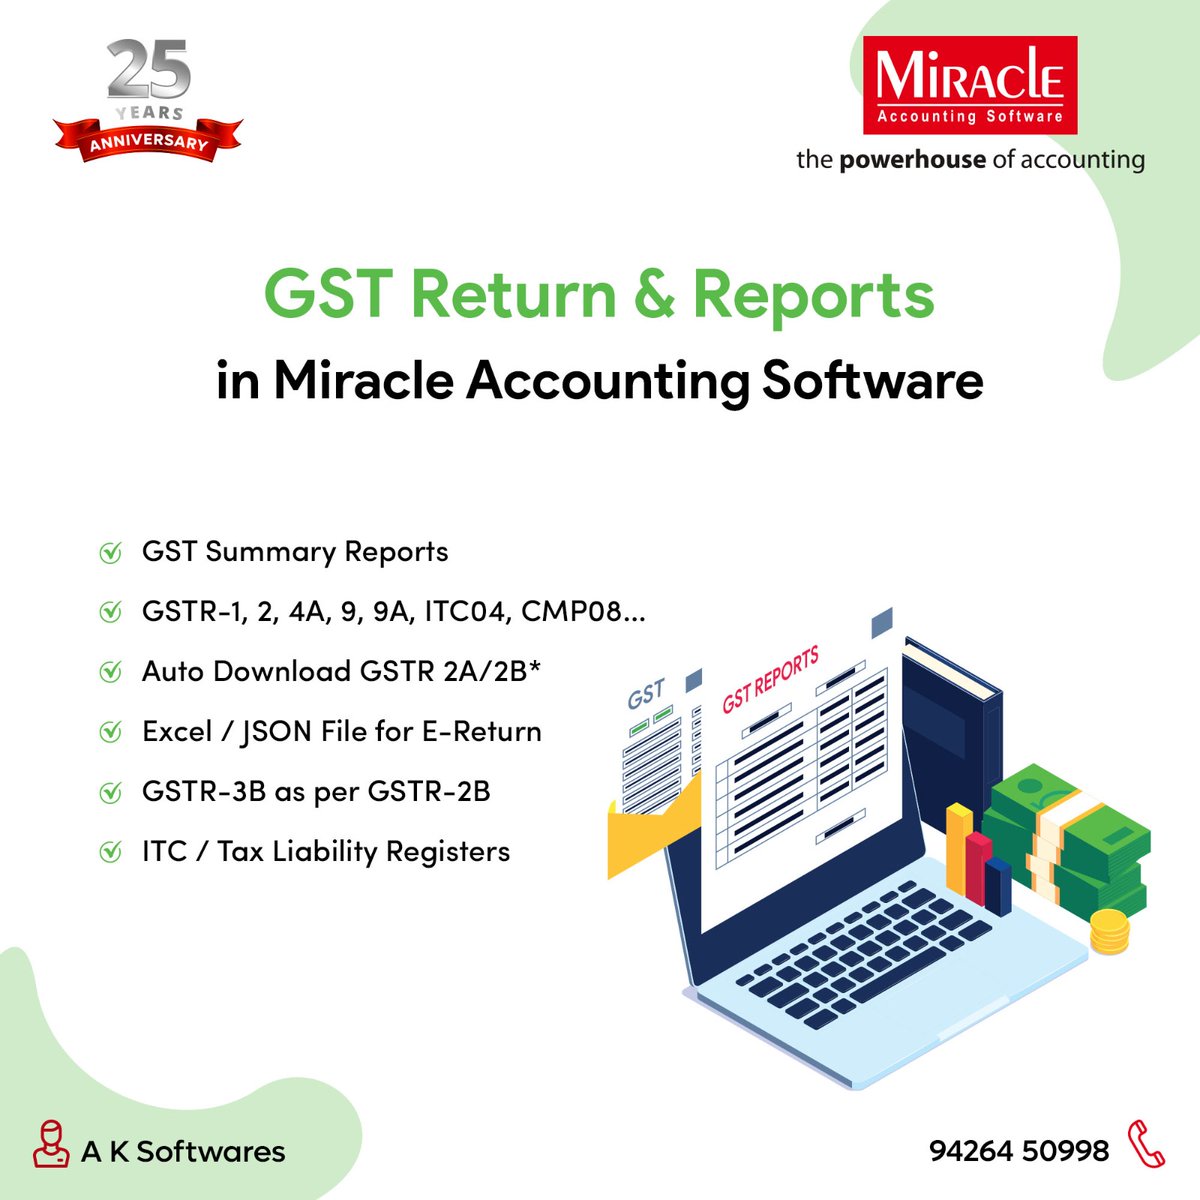 Explore the comprehensive suite of GST Return & Reports in #Miracleaccountingsoftware. From GST Summary to GSTR-1, 2, 4A, 9, 9A, ITC04, CMP08, and more.
Call: 94264 50998 | Visit:aksoftwares.in

#gujarat #ahmedabad #gstupdates #GST